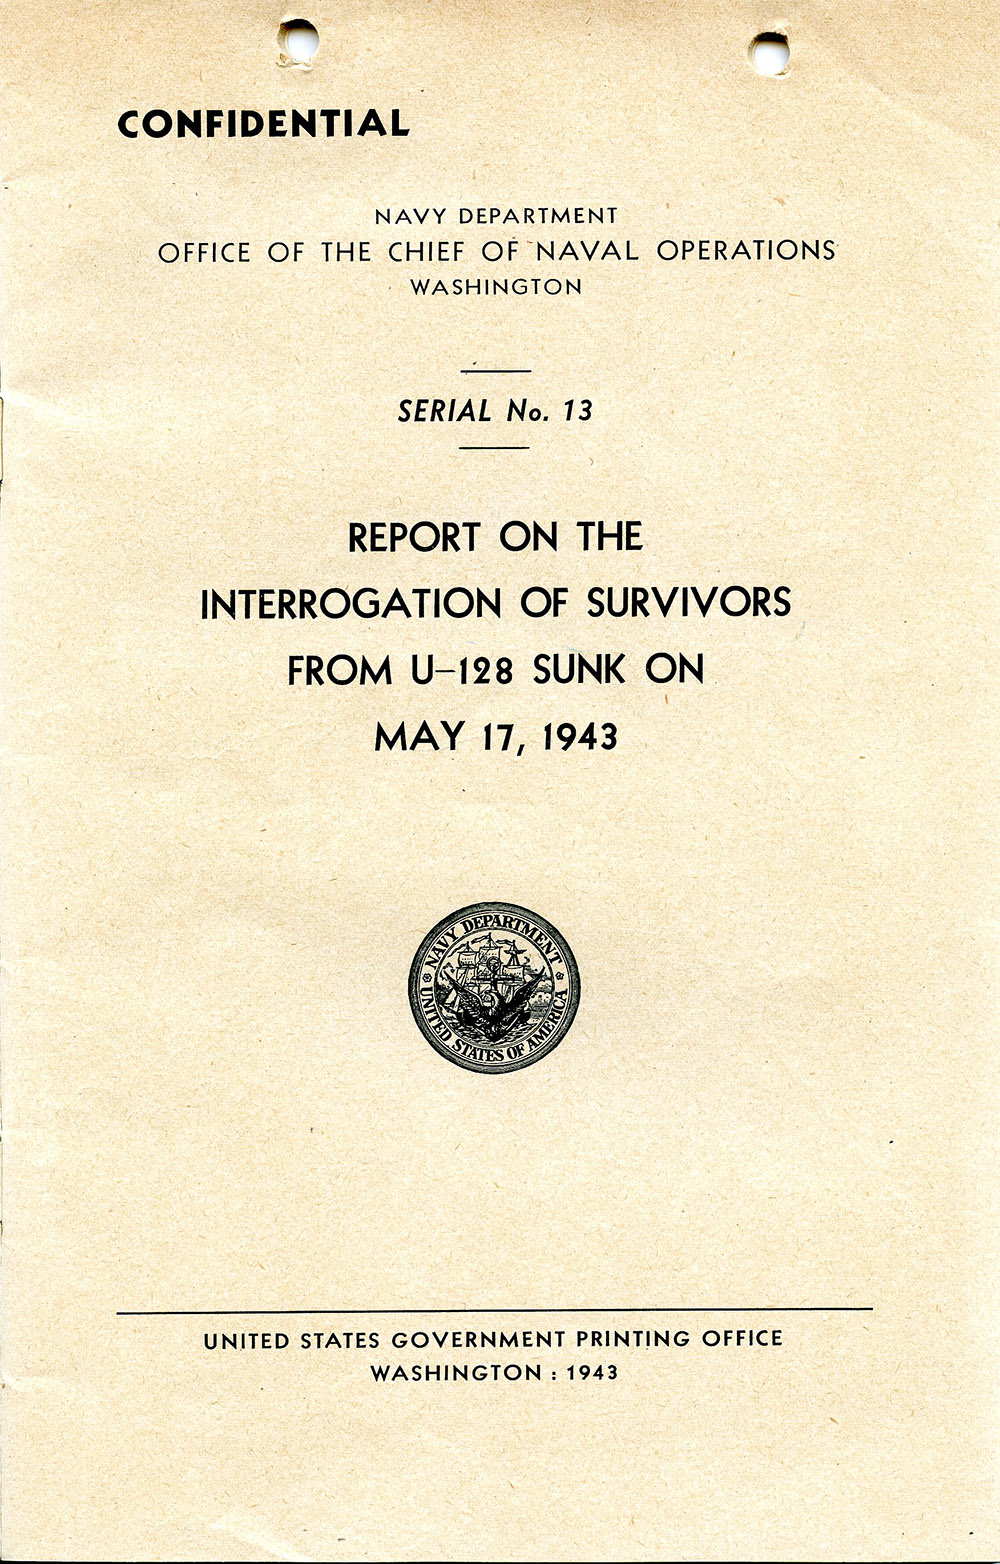 Report on the Sinking of U-128